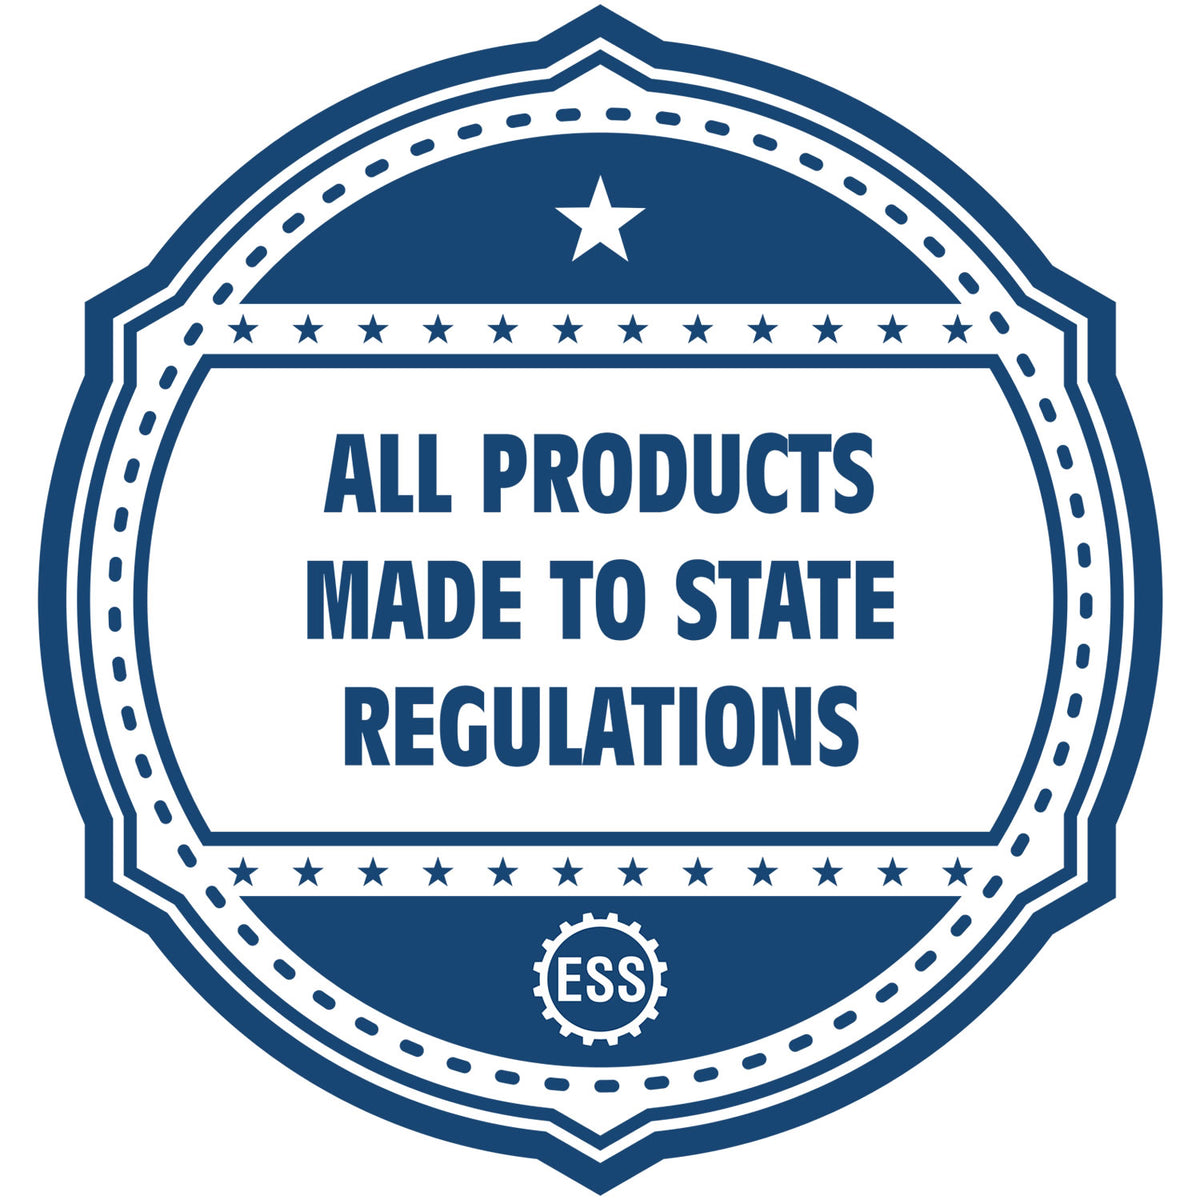 An icon or badge element for the MaxLight Premium Pre-Inked Kentucky State Seal Notarial Stamp showing that this product is made in compliance with state regulations.